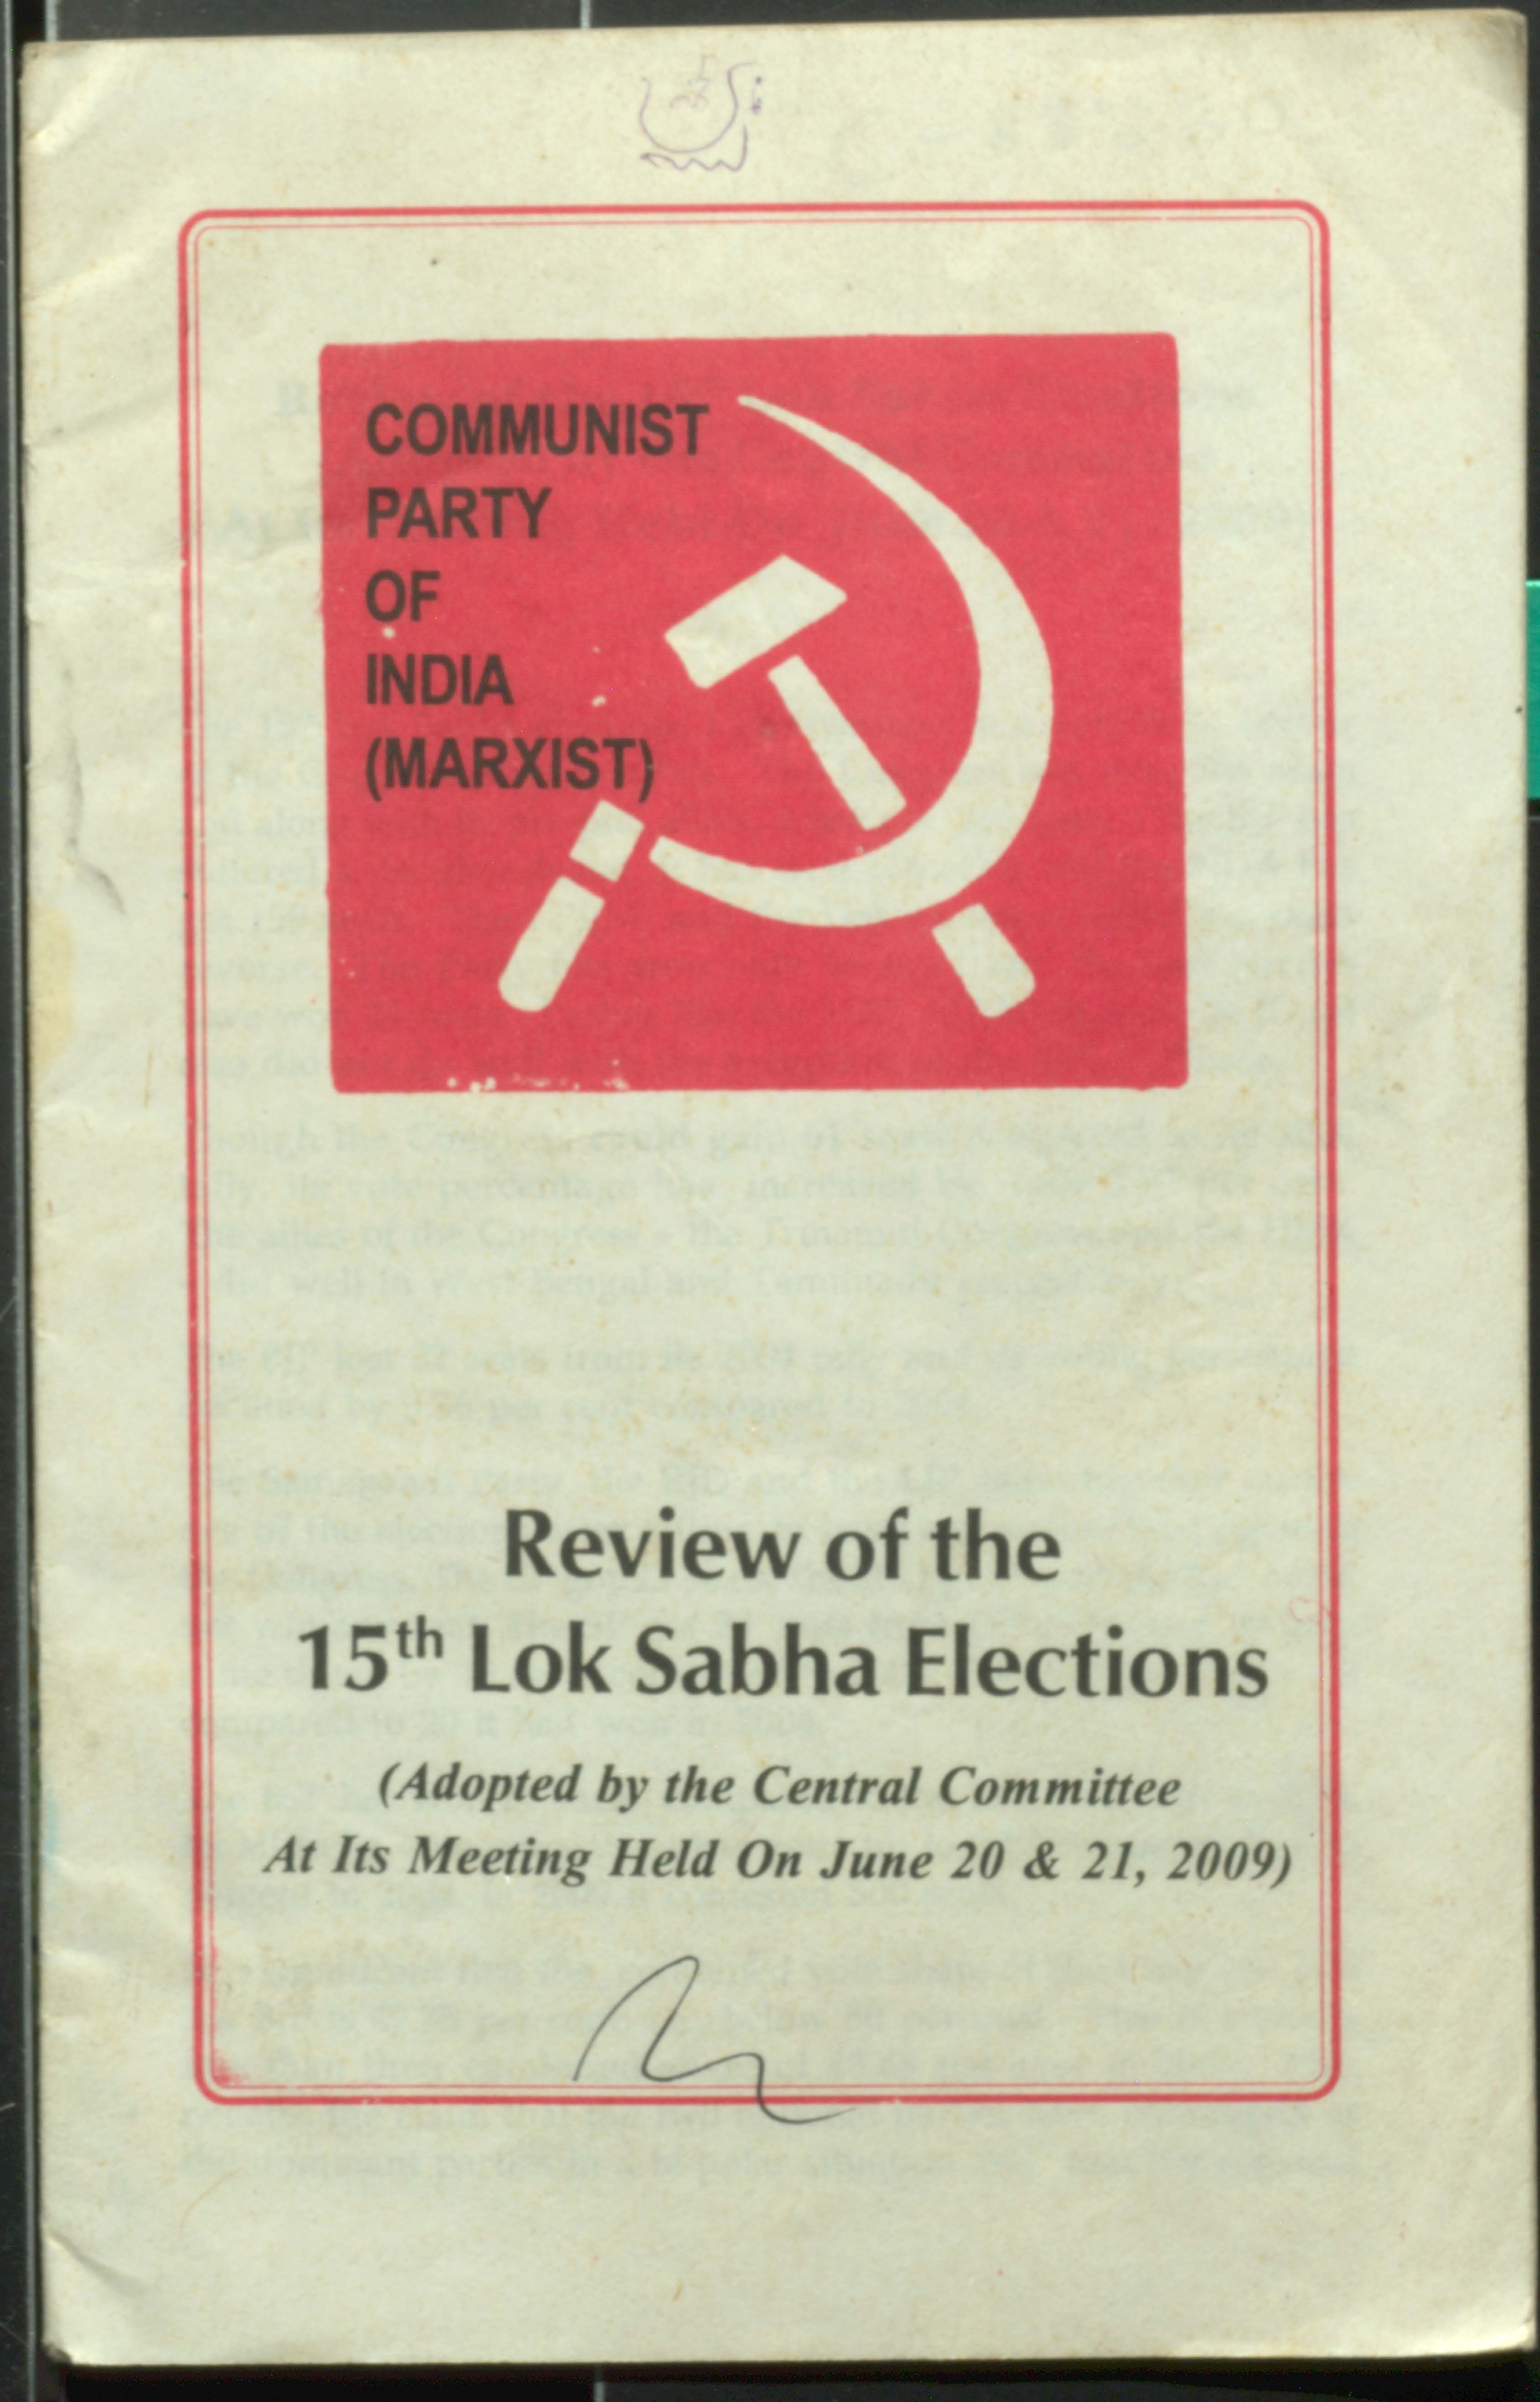 Review of the 15th lok sabha elections